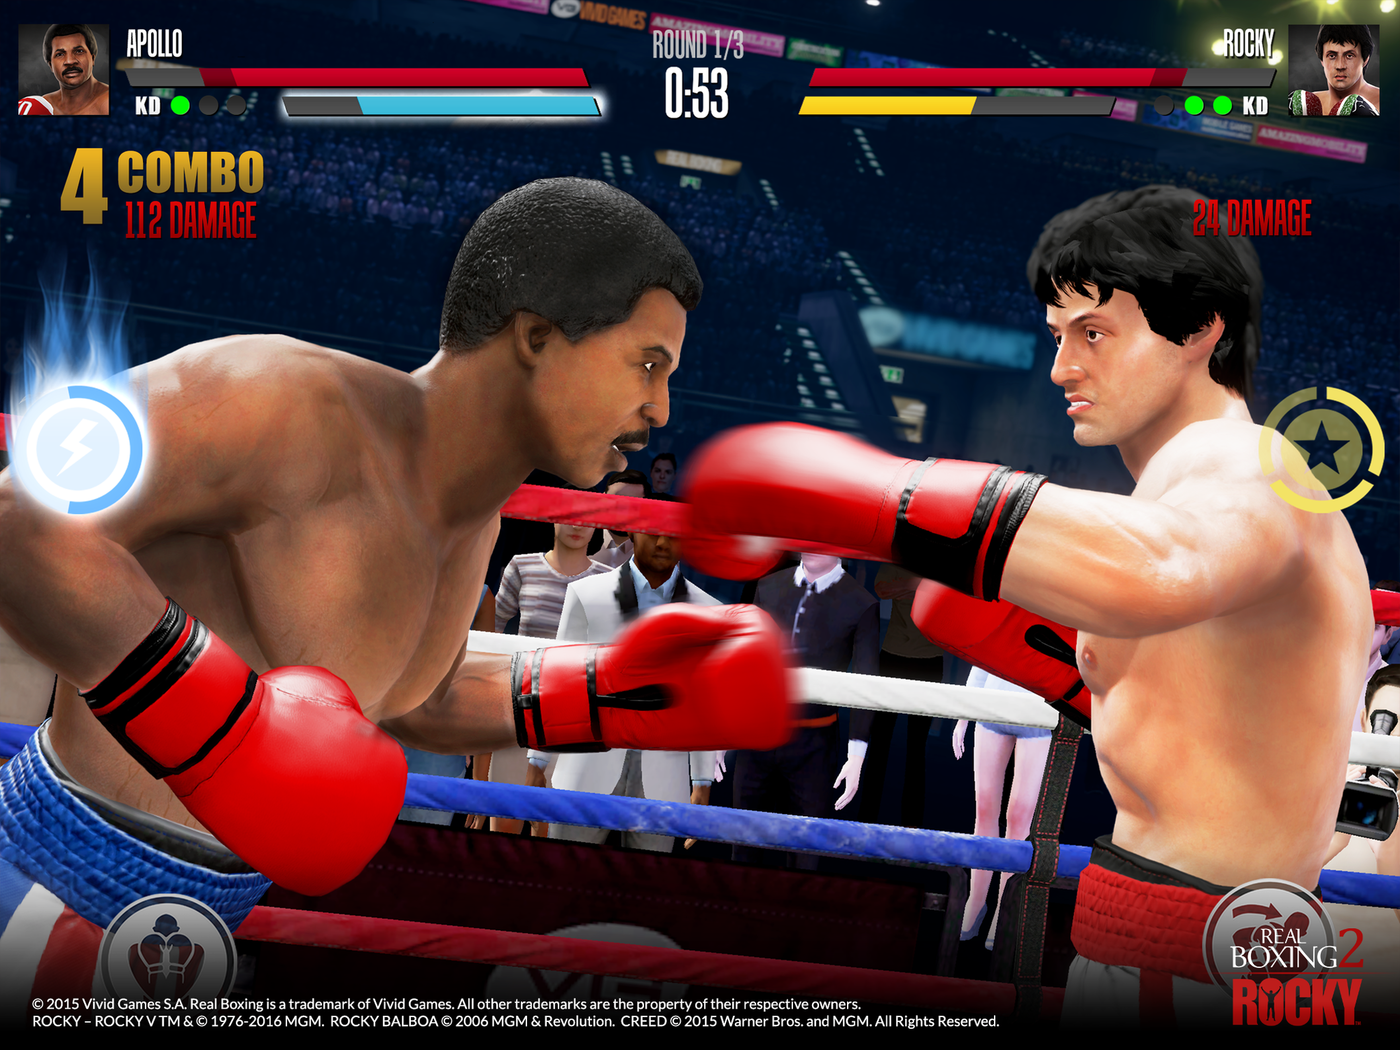 real boxing 2 rocky 4x3 1